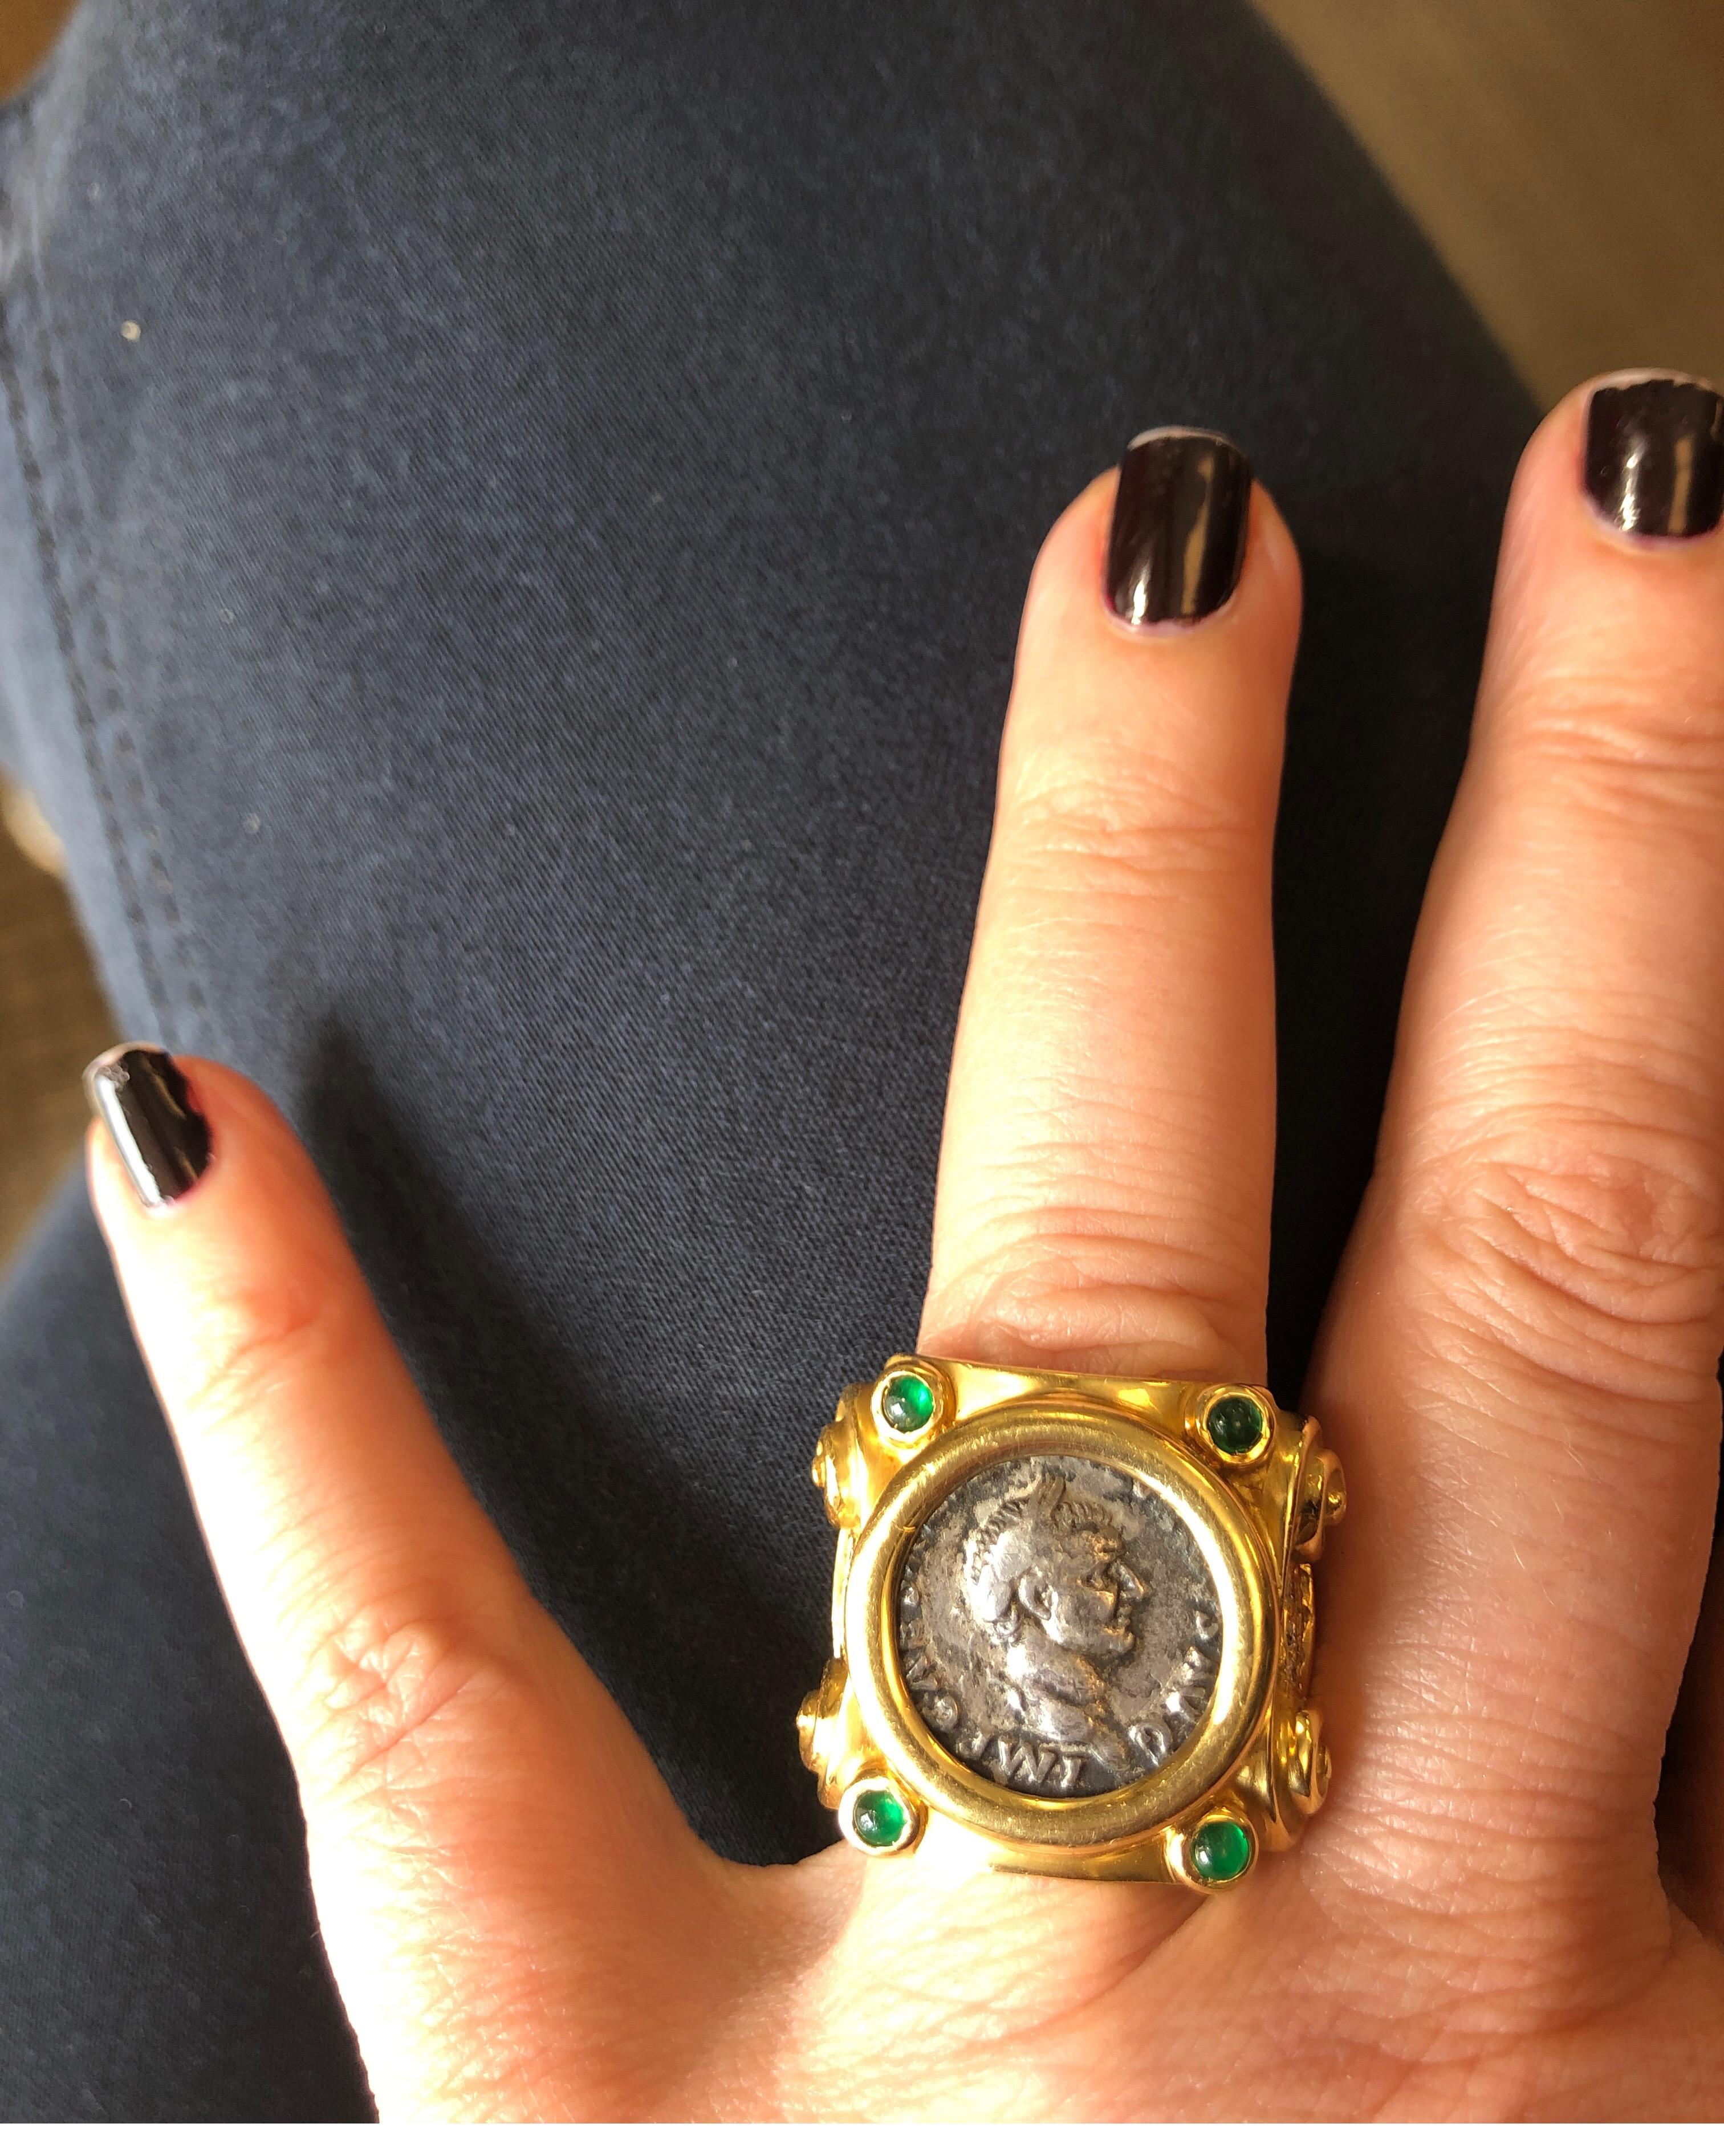 18K yellow gold ring with ancient silver Roman coin and 12 round diamonds weighing .22cts and 4 cabachon emeralds. Weighs 18.2 grams
Finger size 5.5. May be sized